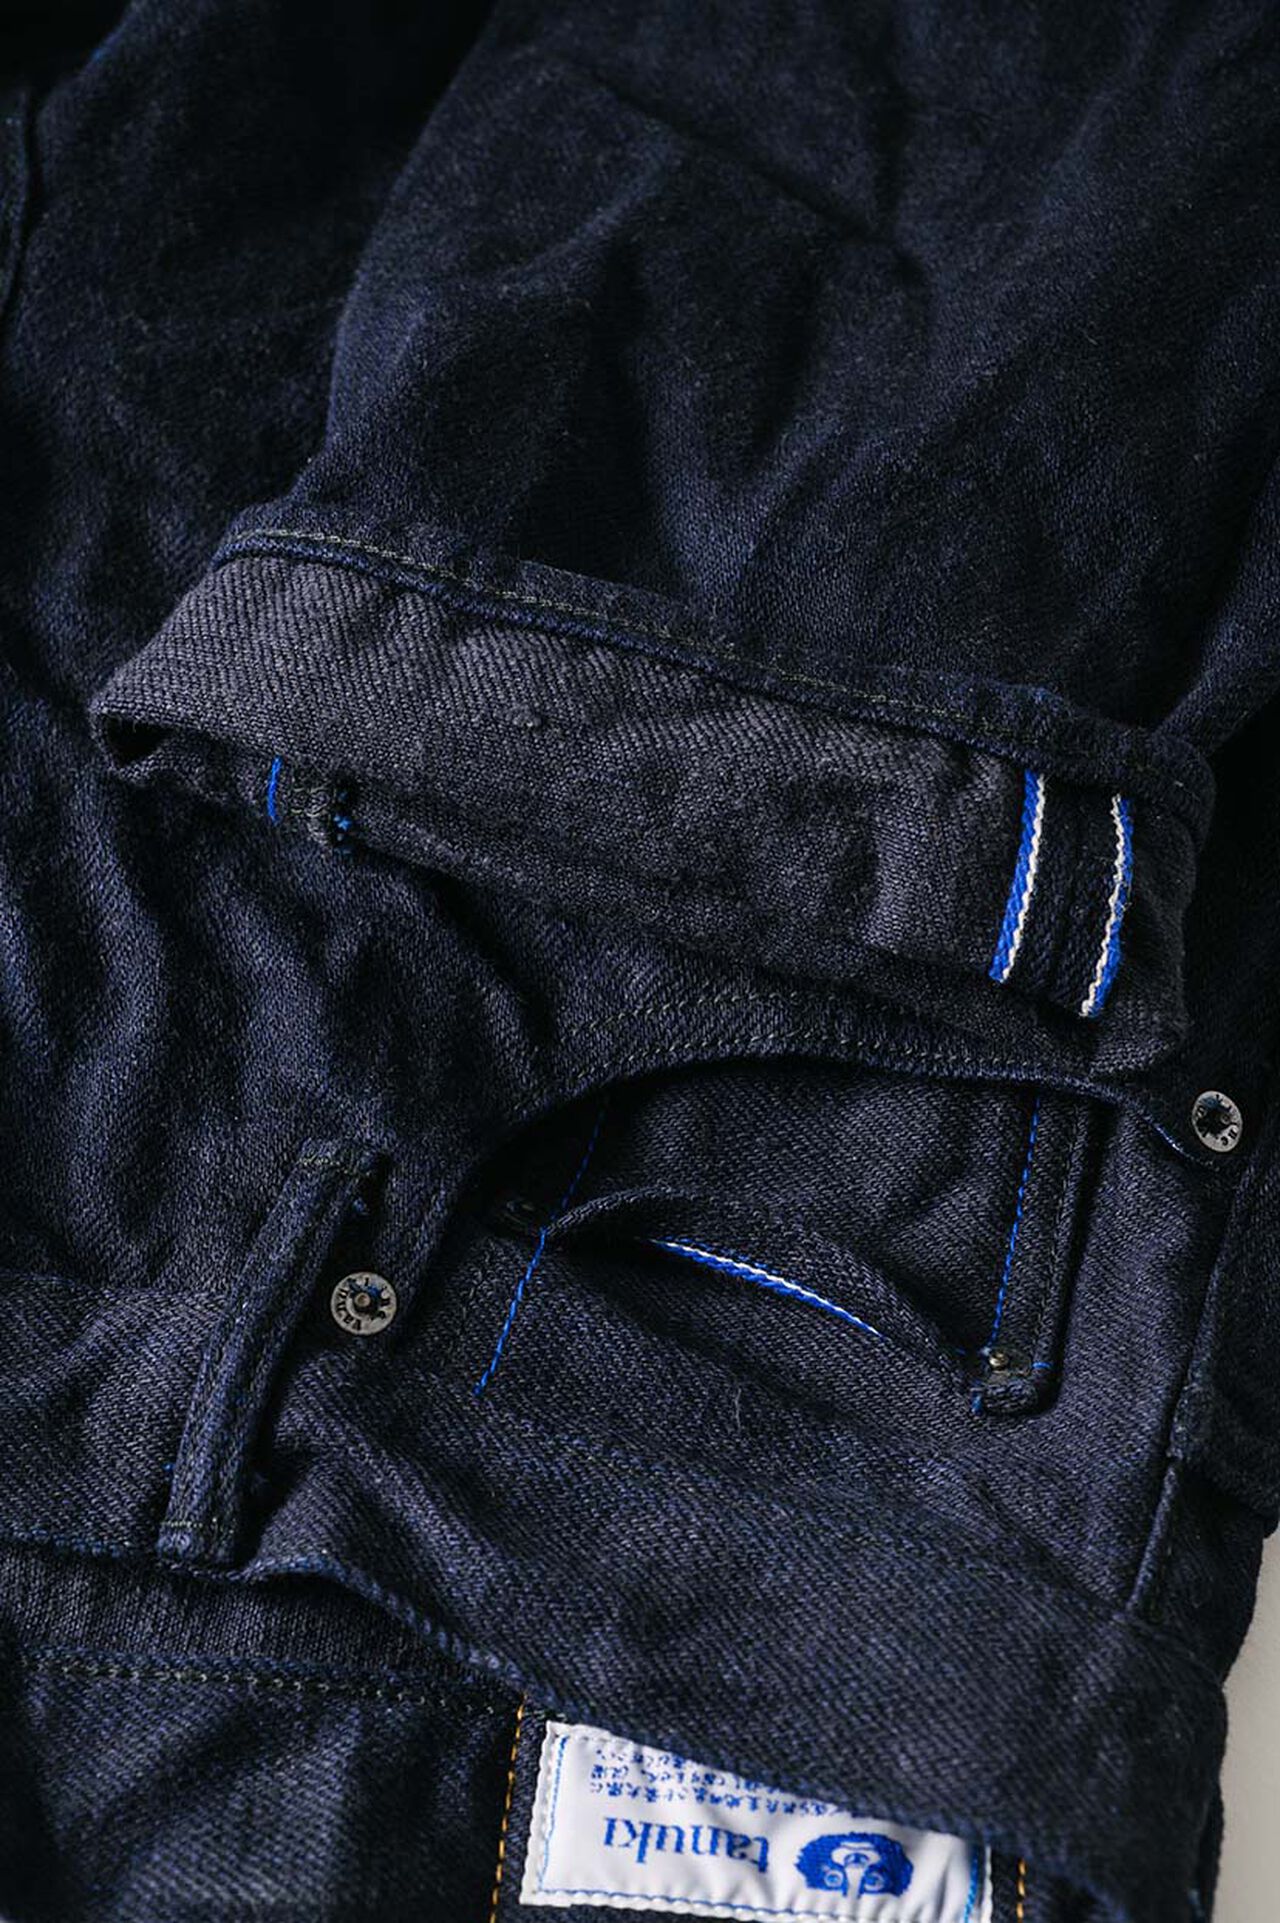 SI2027HT
"Sizima" 19oz High Tapered Jeans,, large image number 8